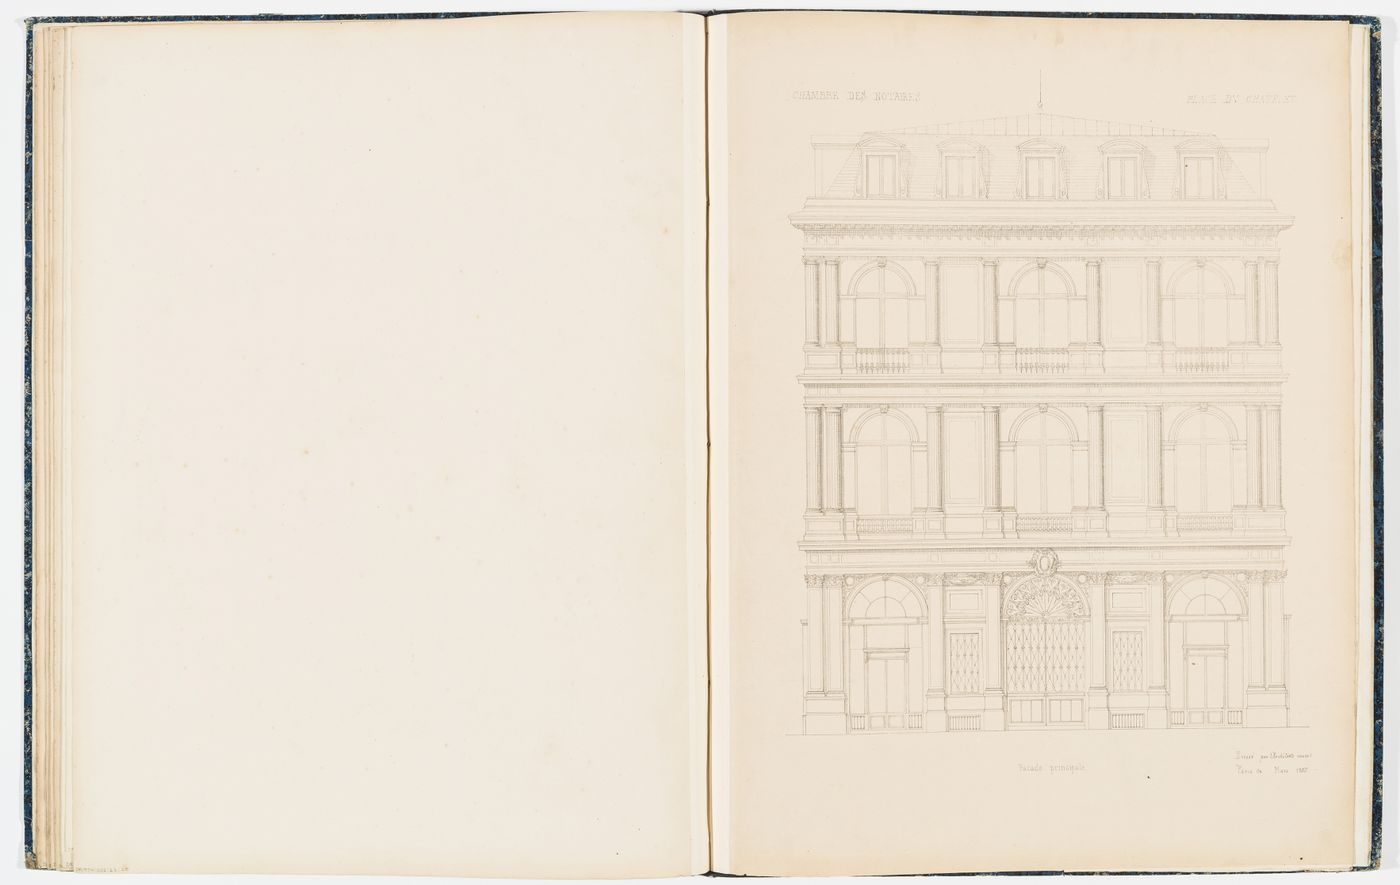 Elevation showing an alternate design for the principal façade of the Chambre des Notaires